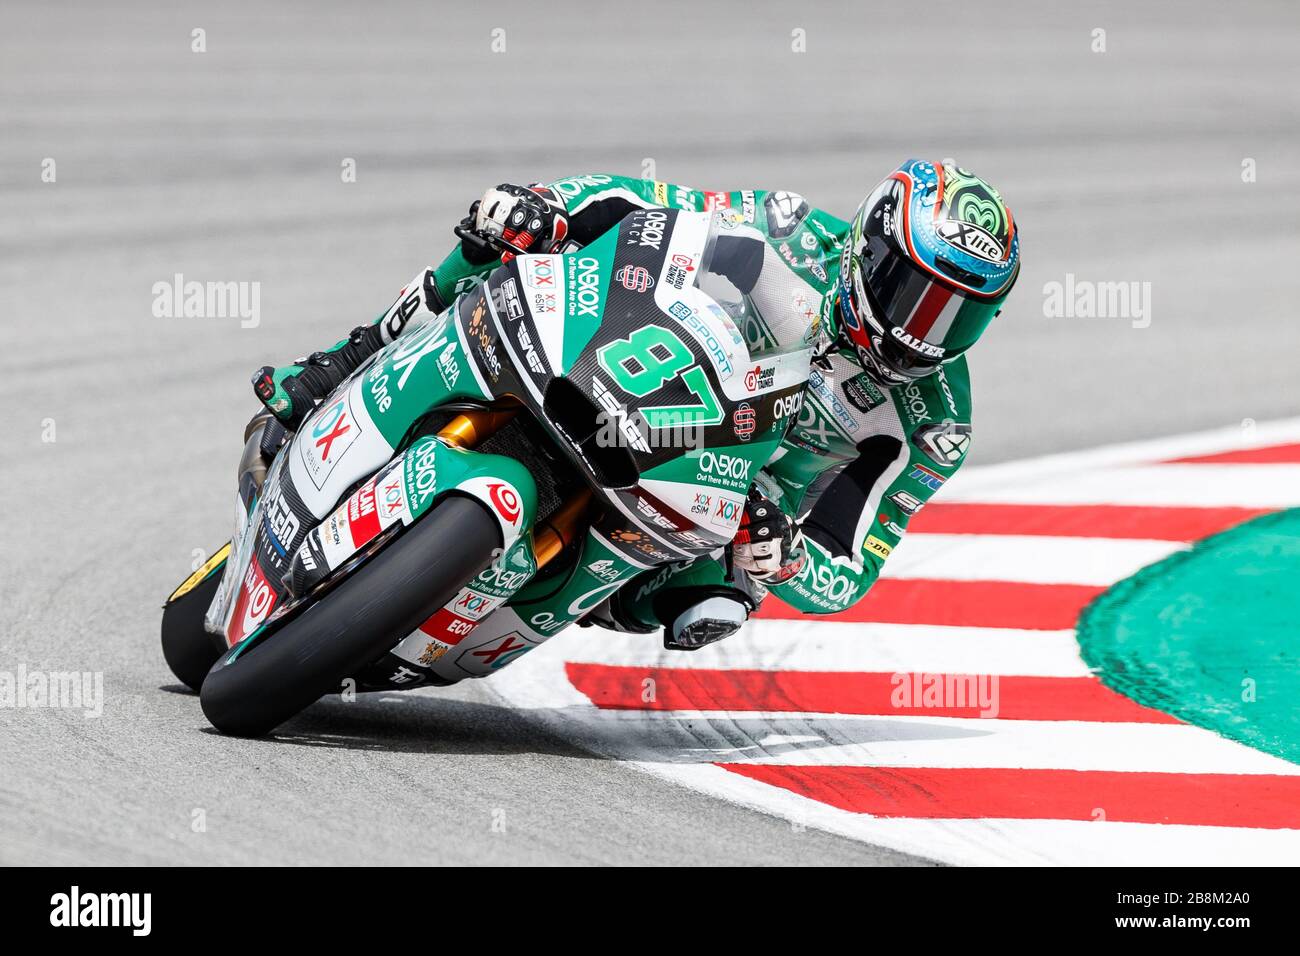 Montmelo Spain June 14 Remy Gardner Of Onexox Tkkr Sag Team During The Free Practice Moto 2 At Circuit De Catalunya On June 14 2019 In Montmelo Stock Photo Alamy